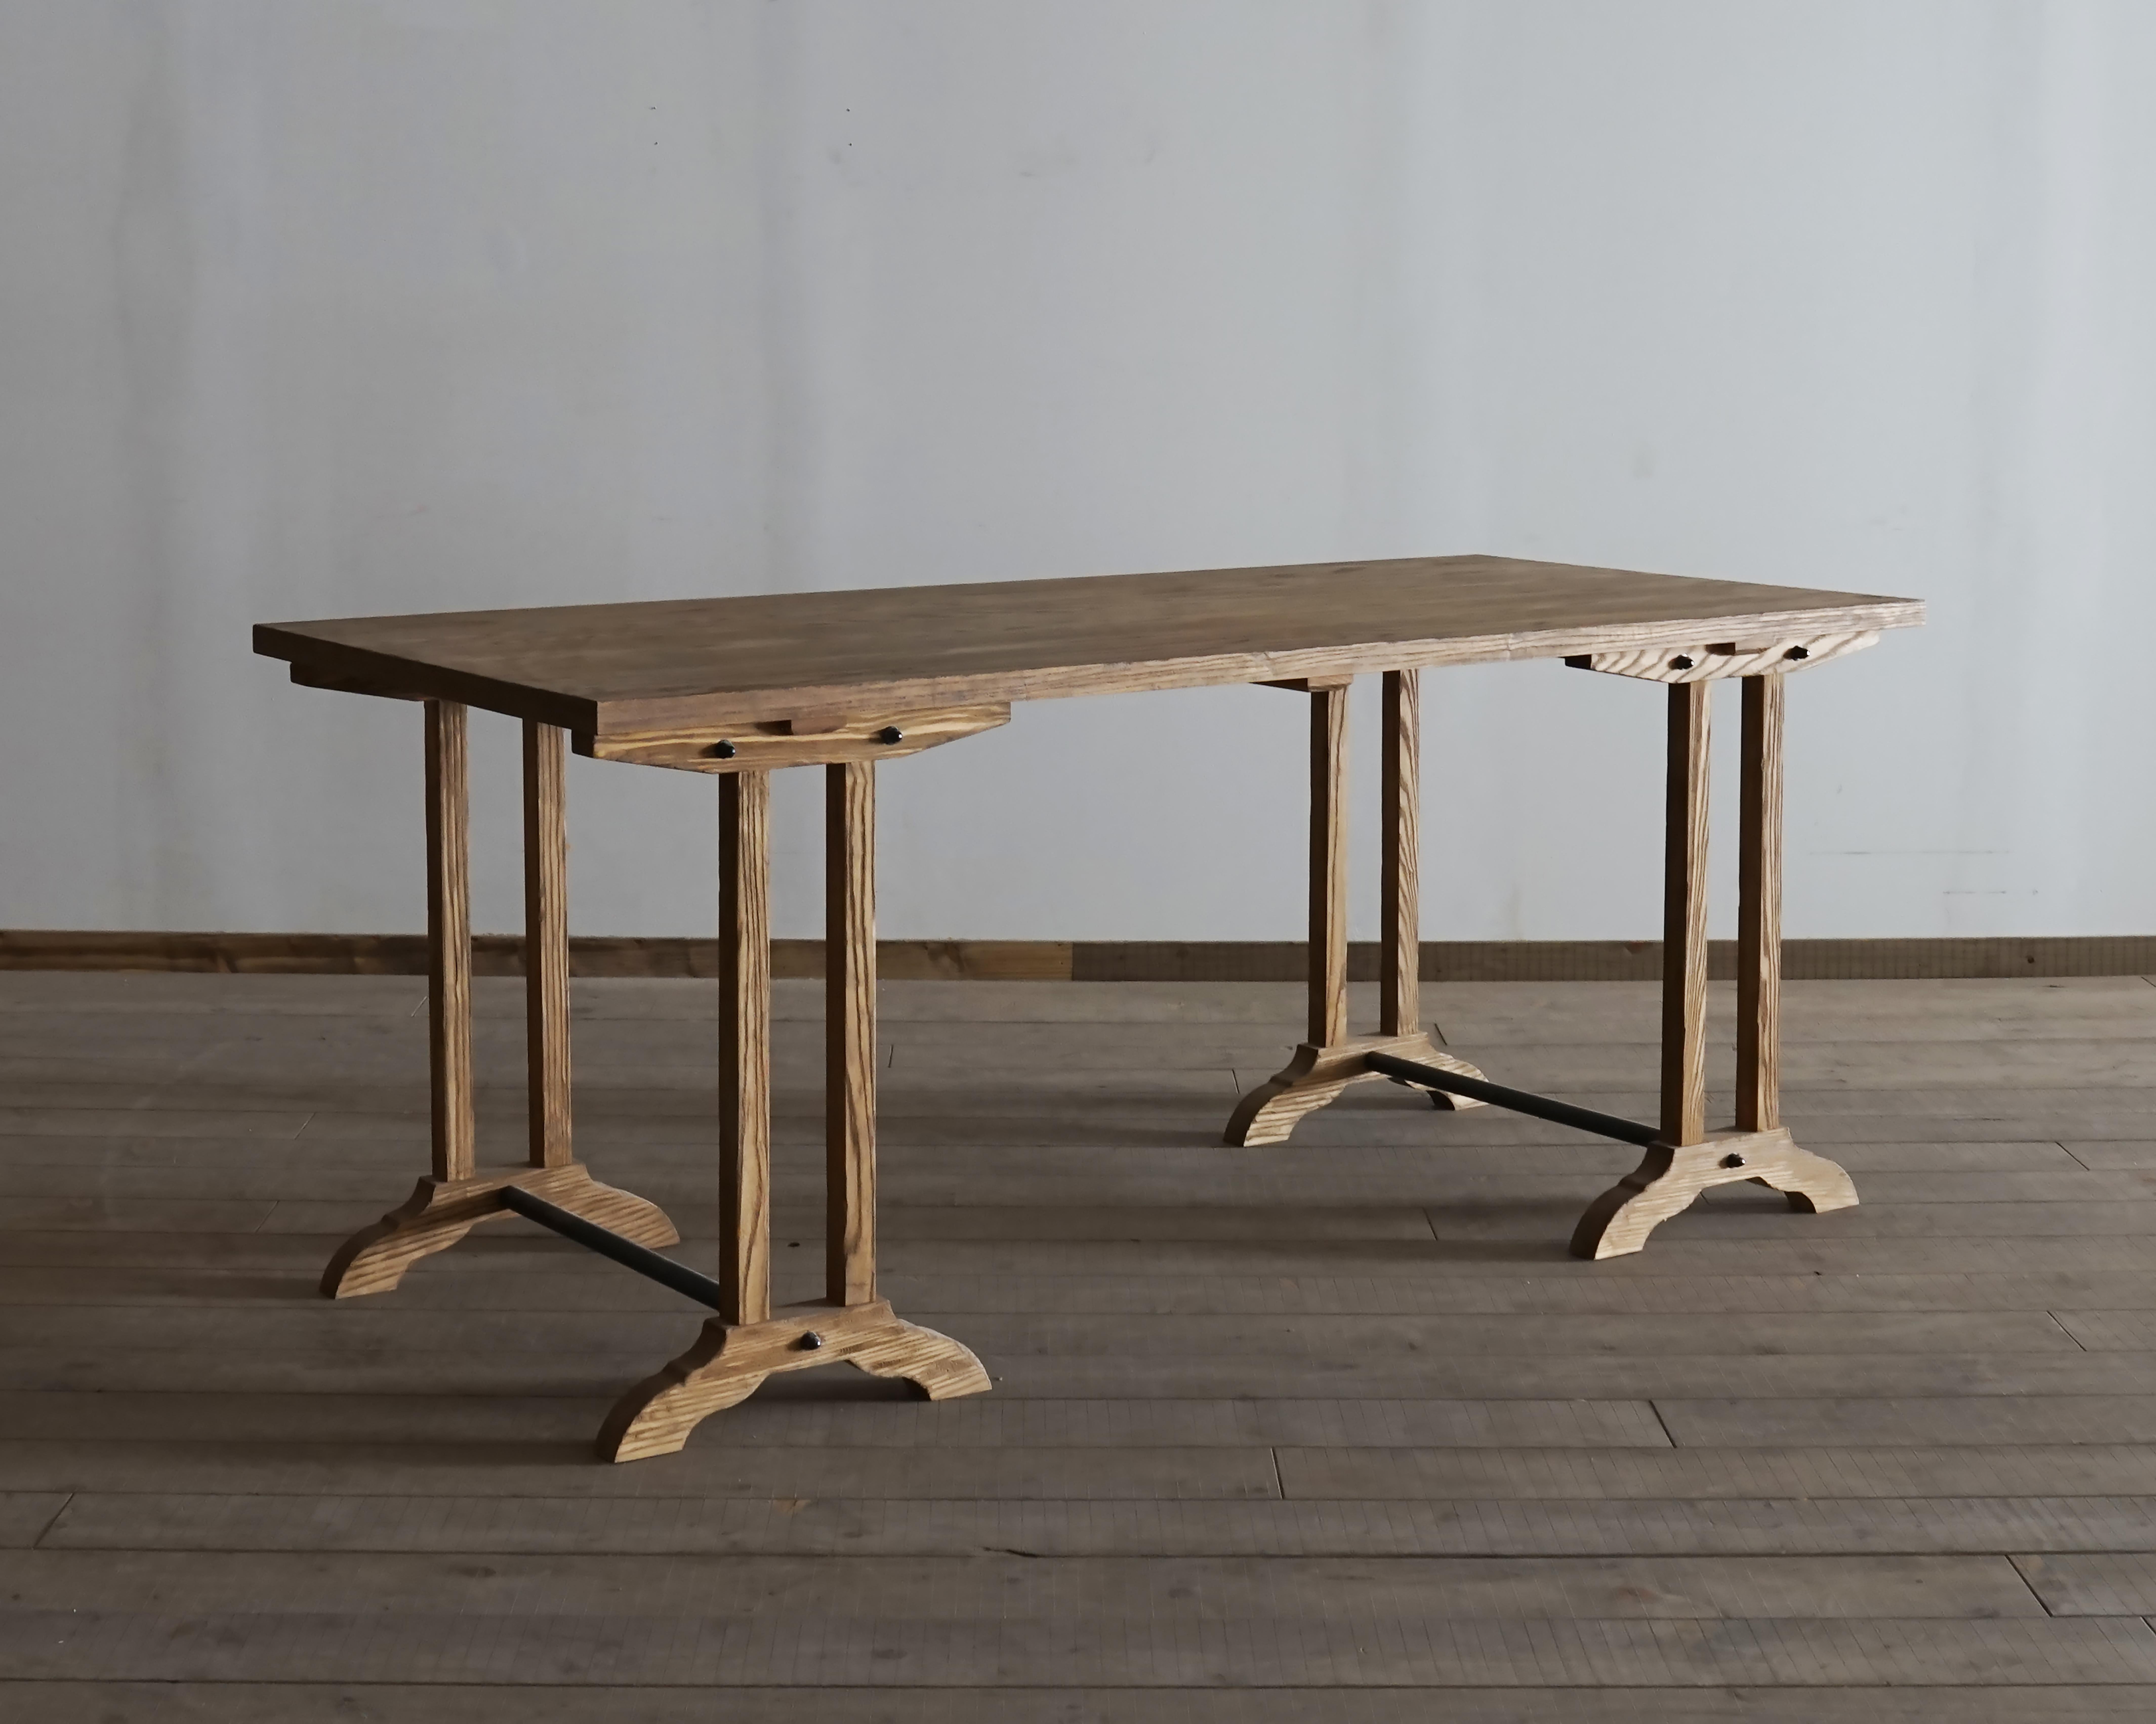 This trestle table is based on a French workbench and has been made in the style of an antique. The simple straight lines of the top and the eight legs give the table a different appearance depending on the angle of view. The only curve is at the